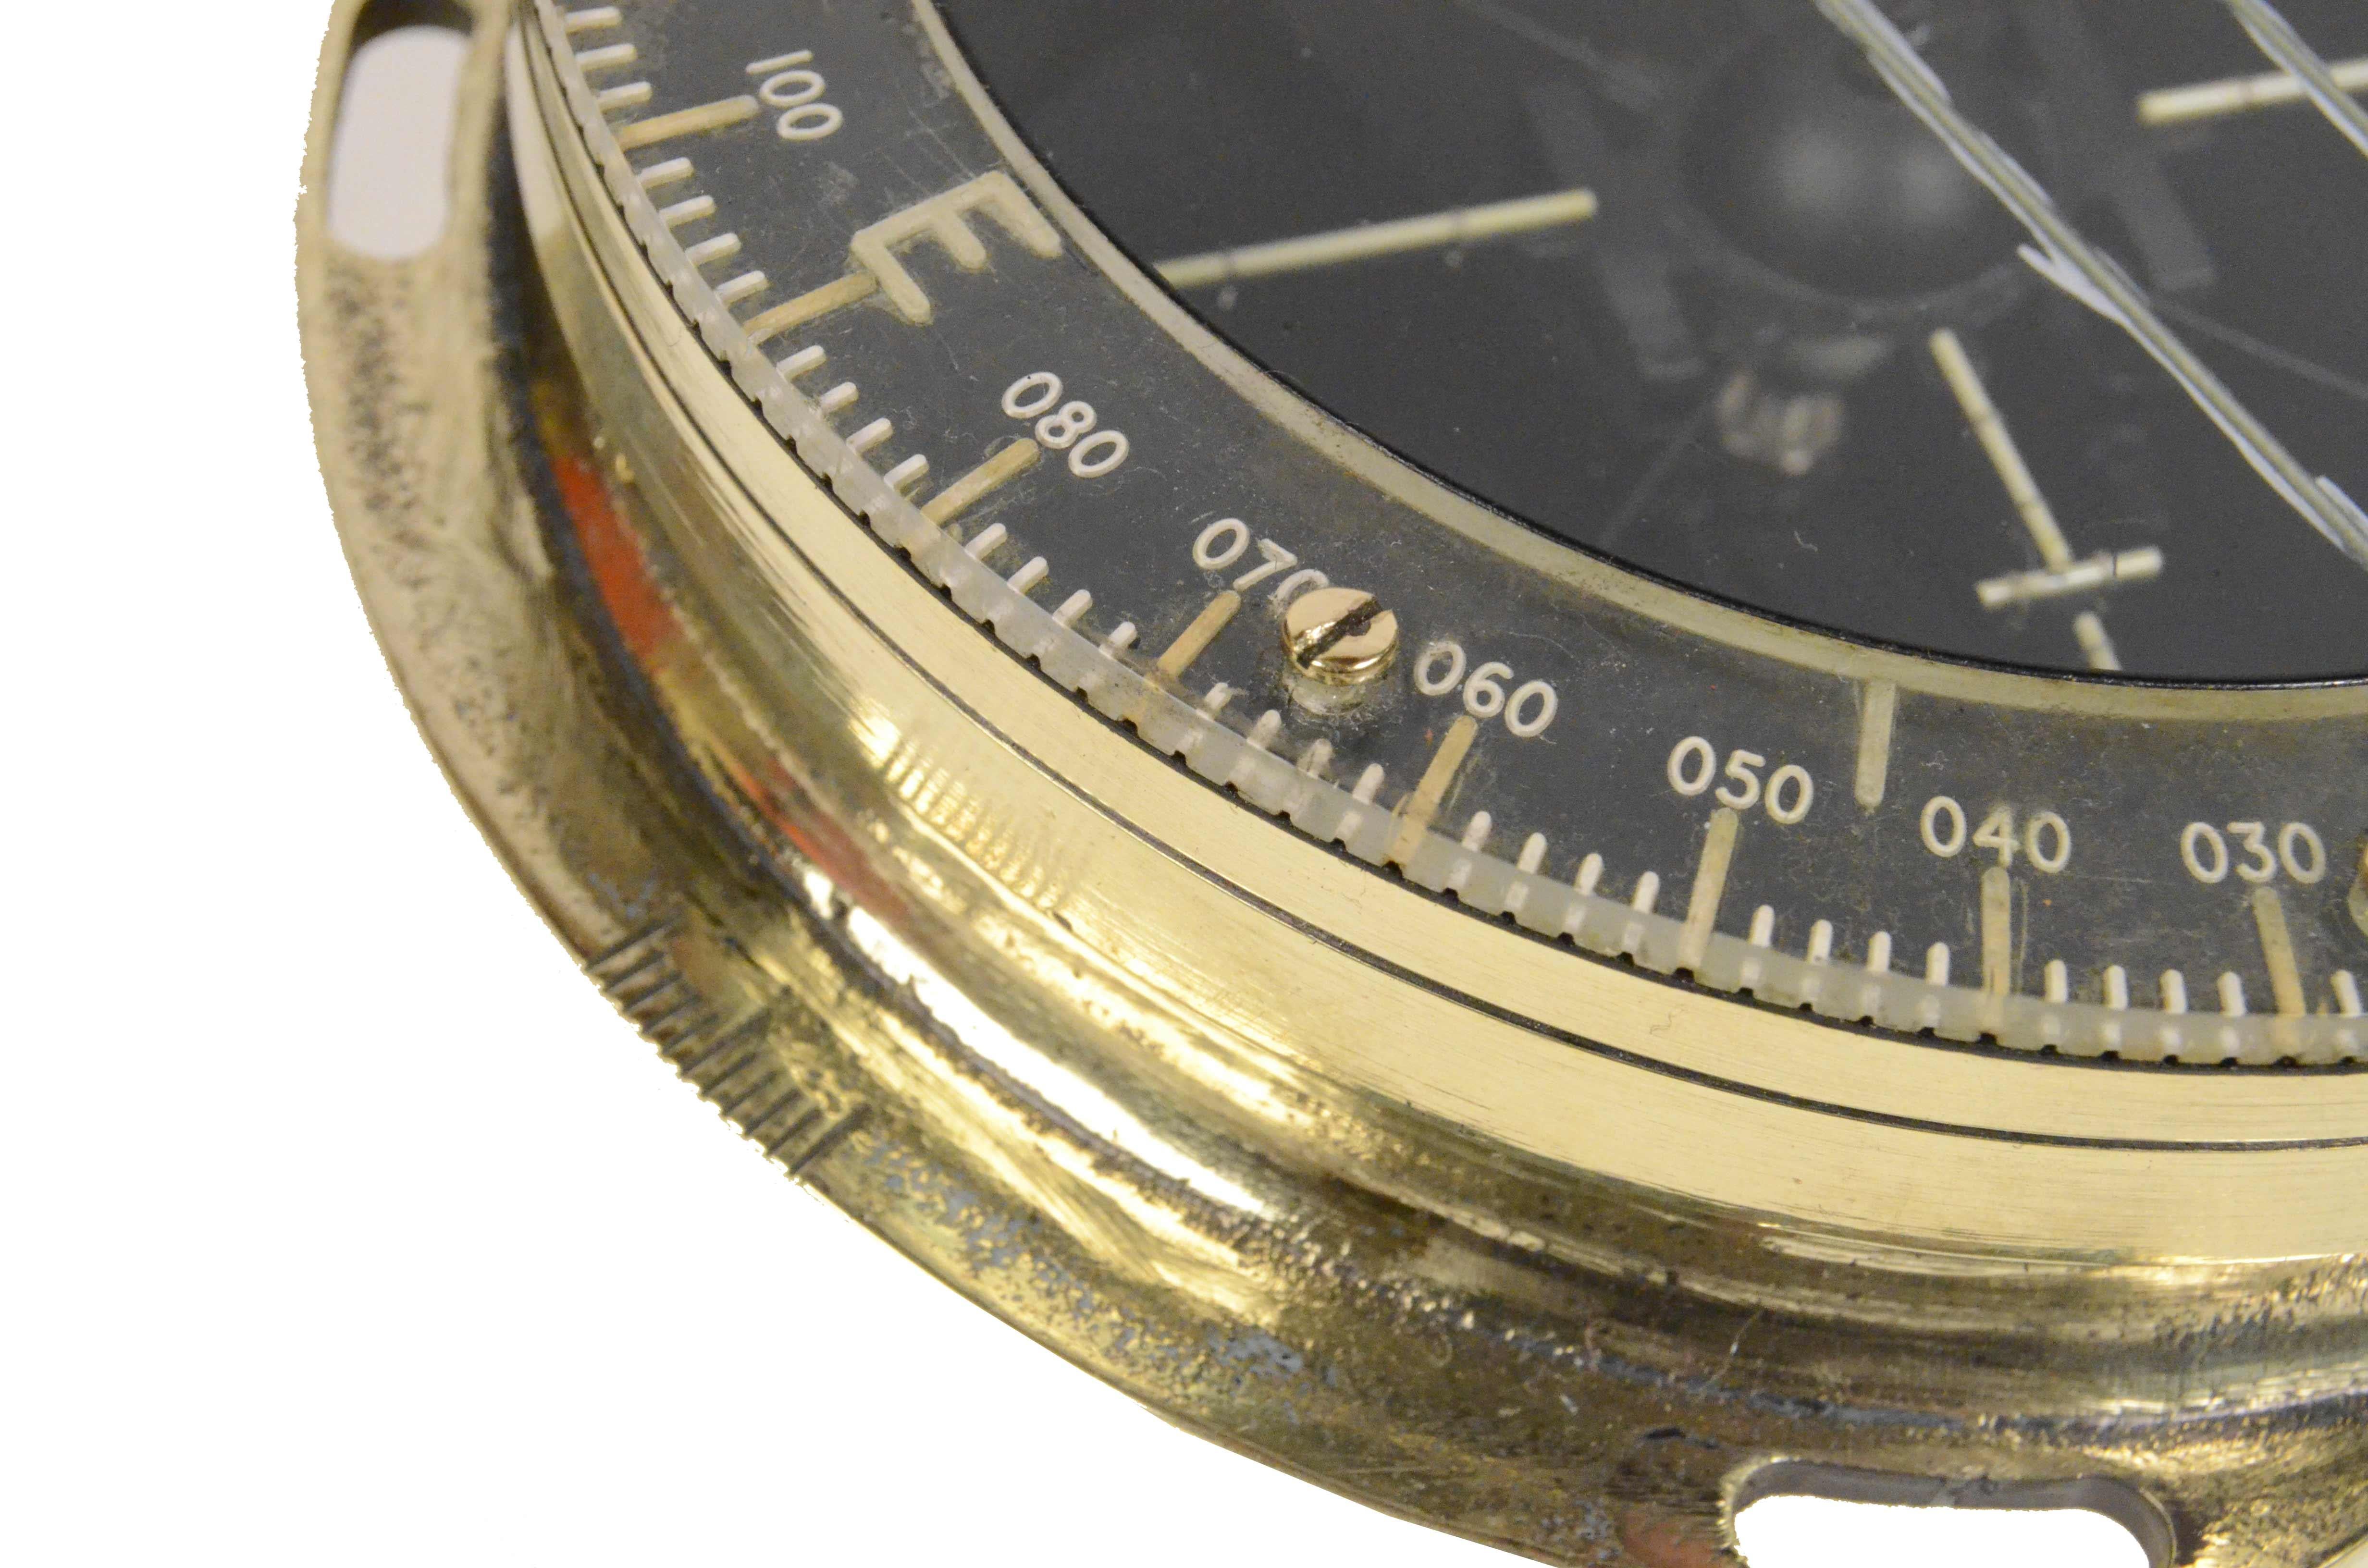 1935s Brass Aviation Compass Used forBoeing B-17 Flyin Fortress American Bomber  1